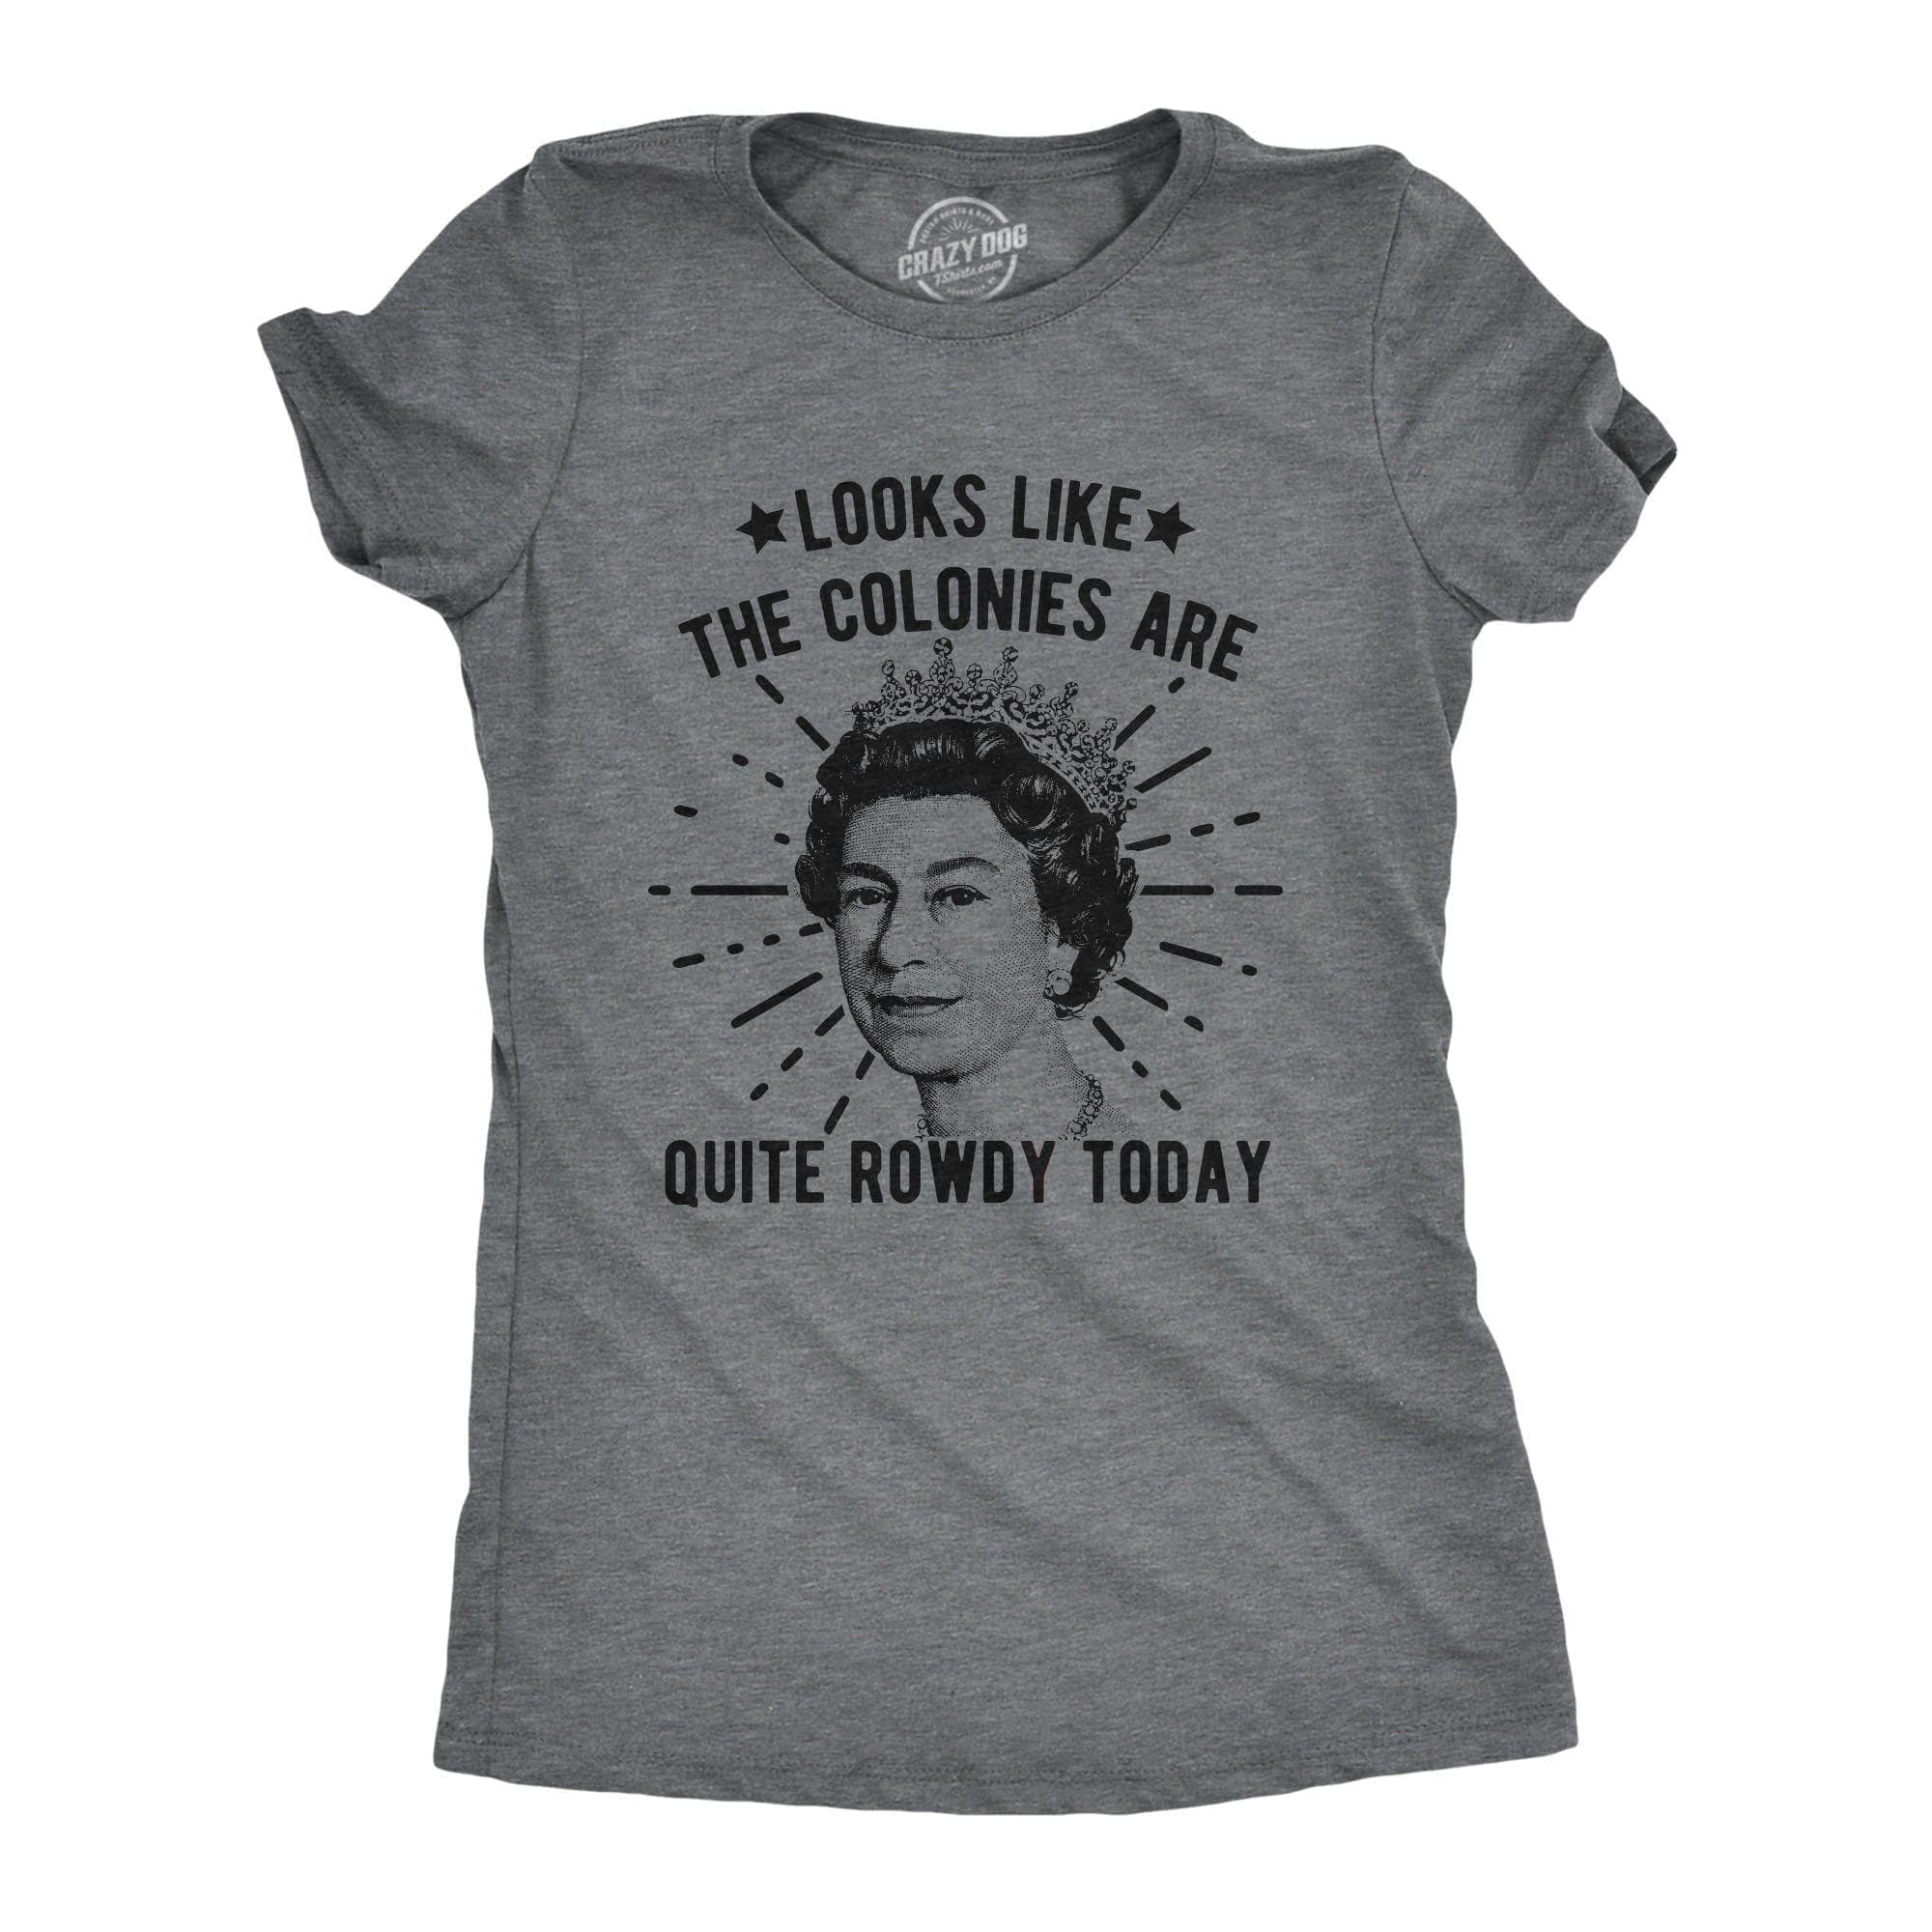 Looks Like The Colonies Are Quite Rowdy Today Women's Tshirt - Crazy Dog T-Shirts